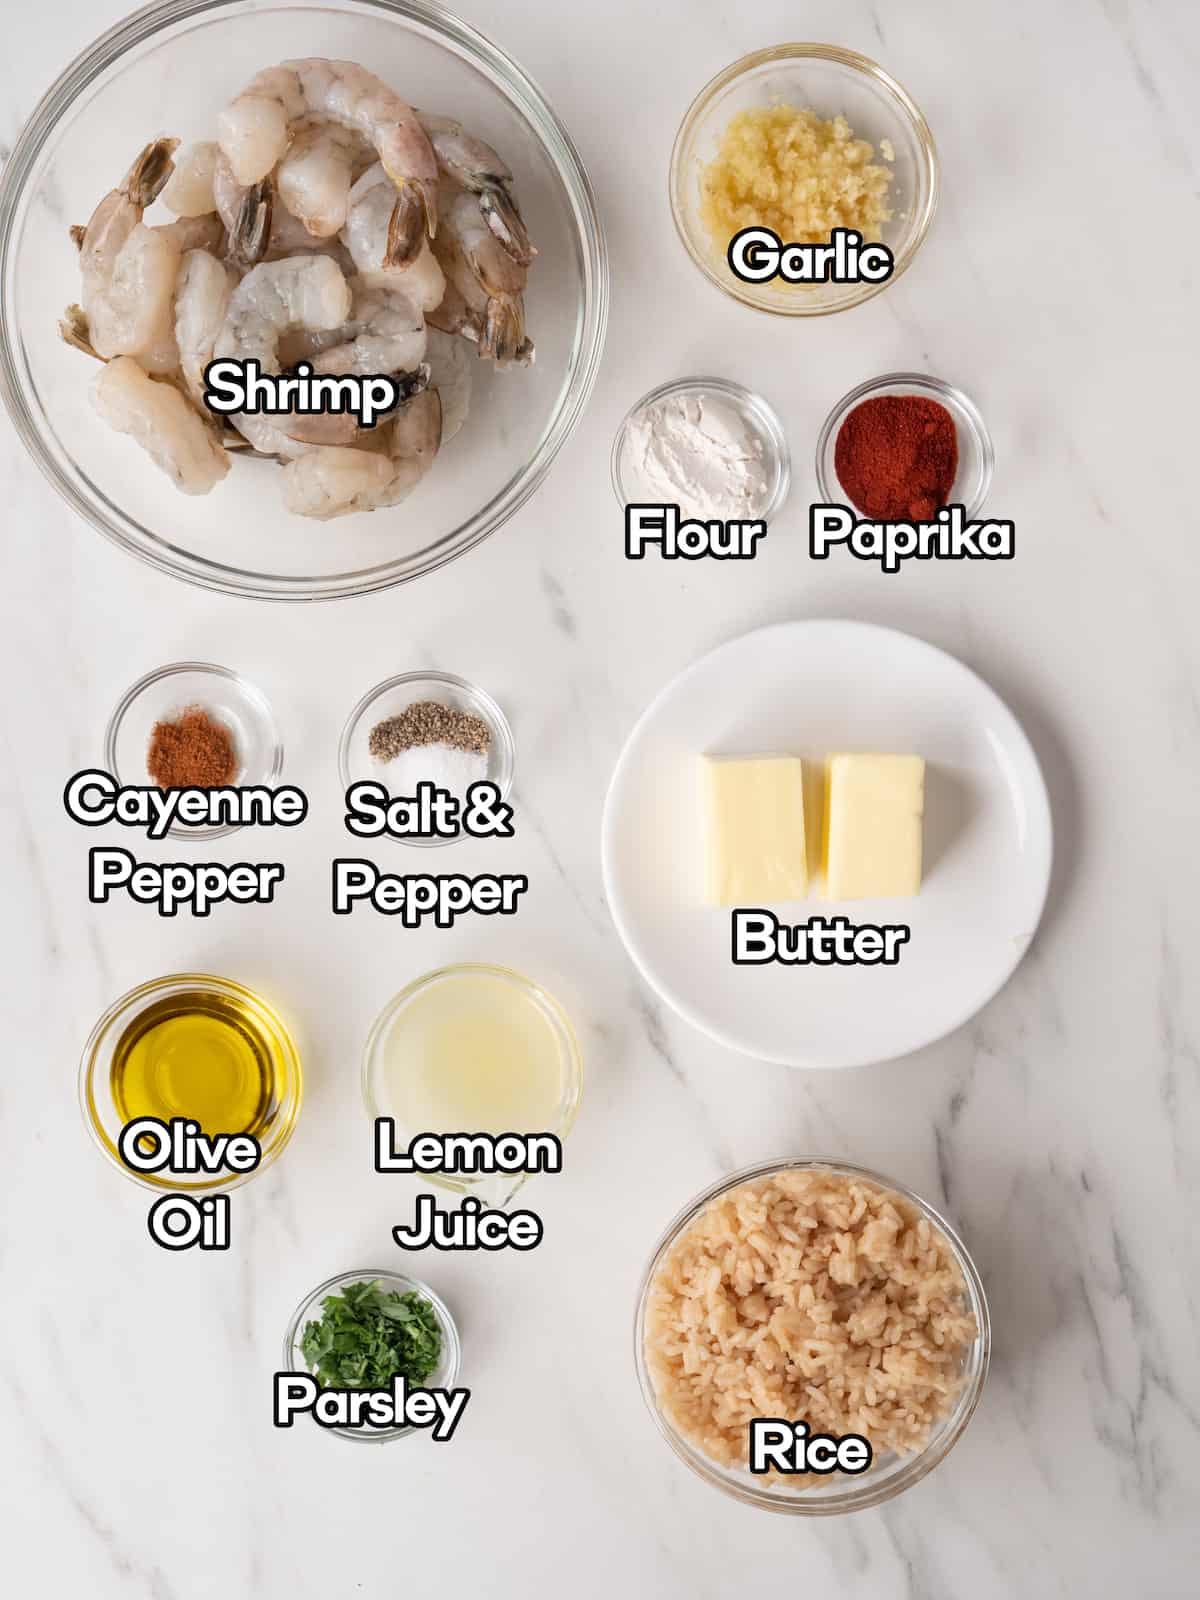 Mise-en-place with all the ingredients required to make hawaiian garlic shrimp.